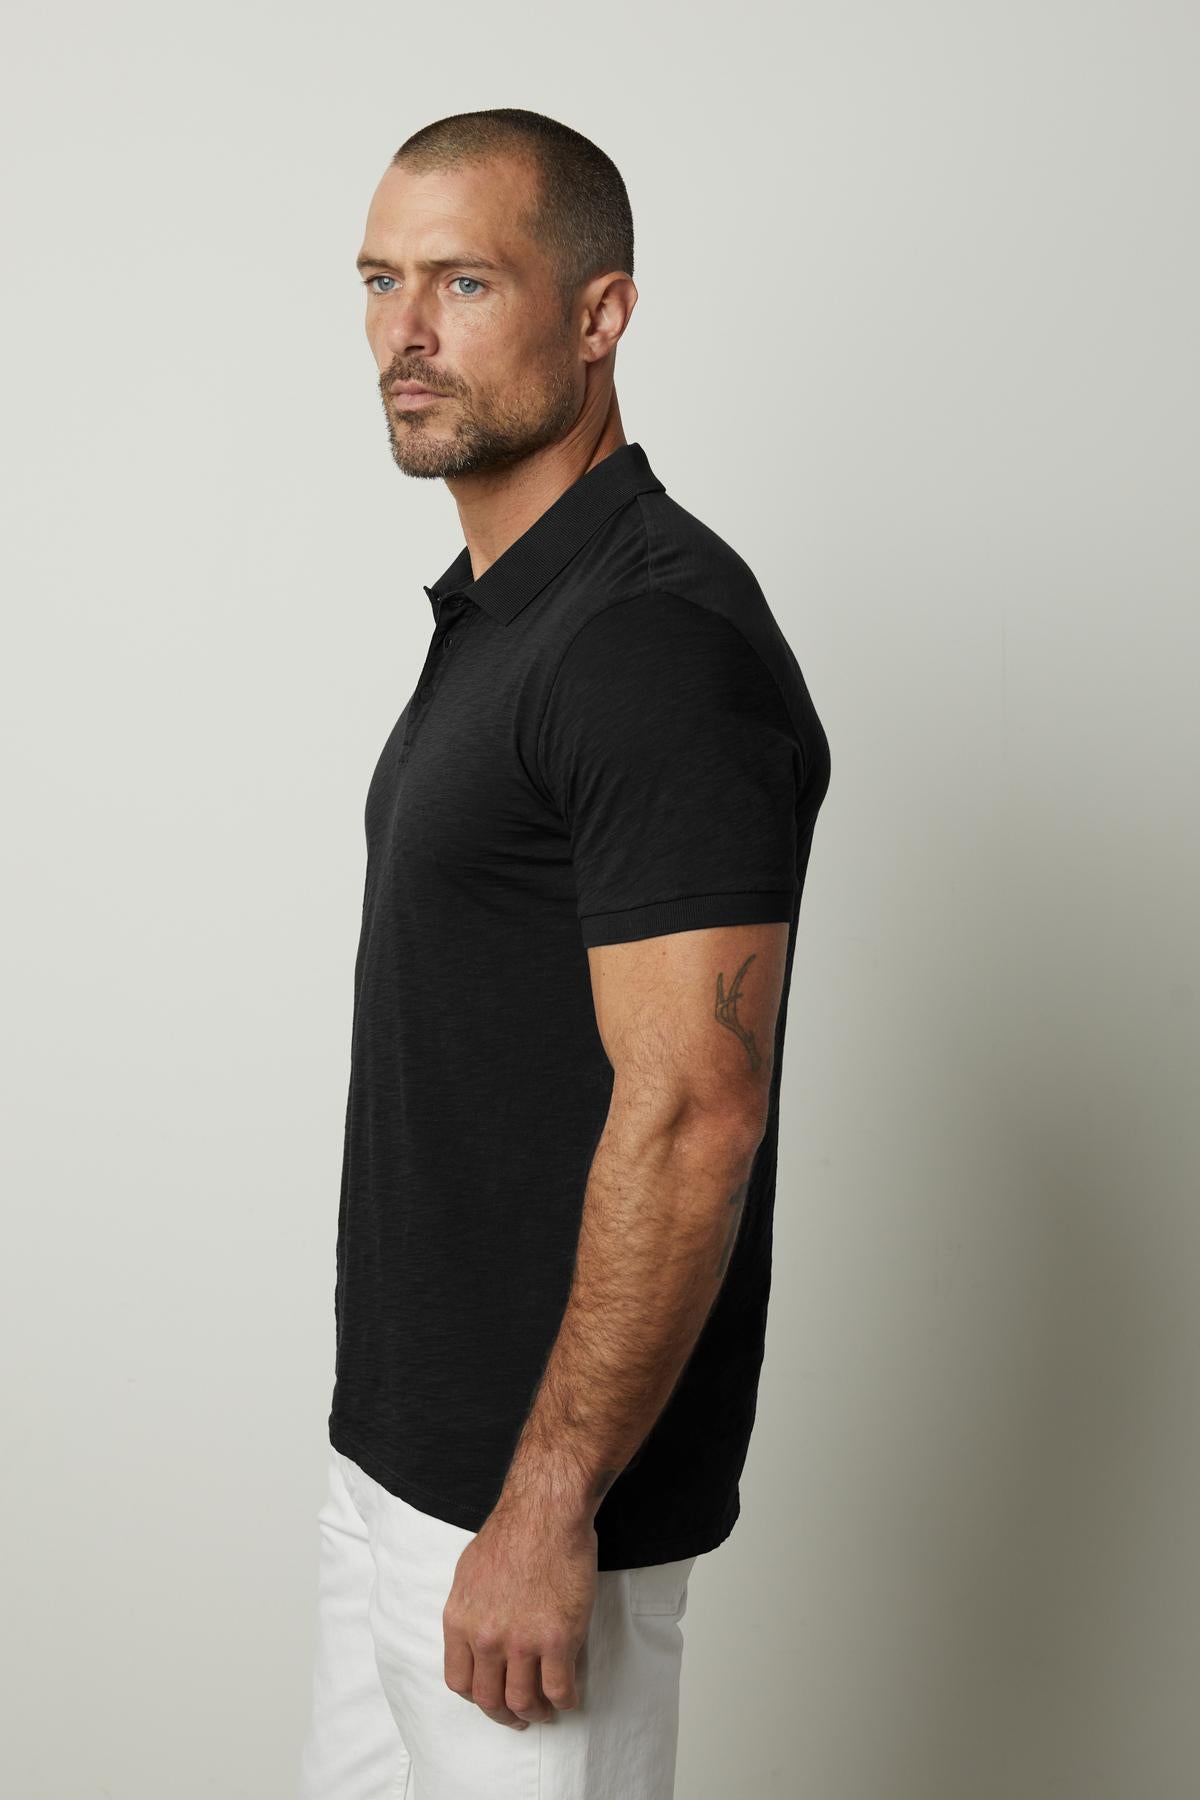   A man wearing a black NIKO POLO shirt and white pants by Velvet by Graham & Spencer. 